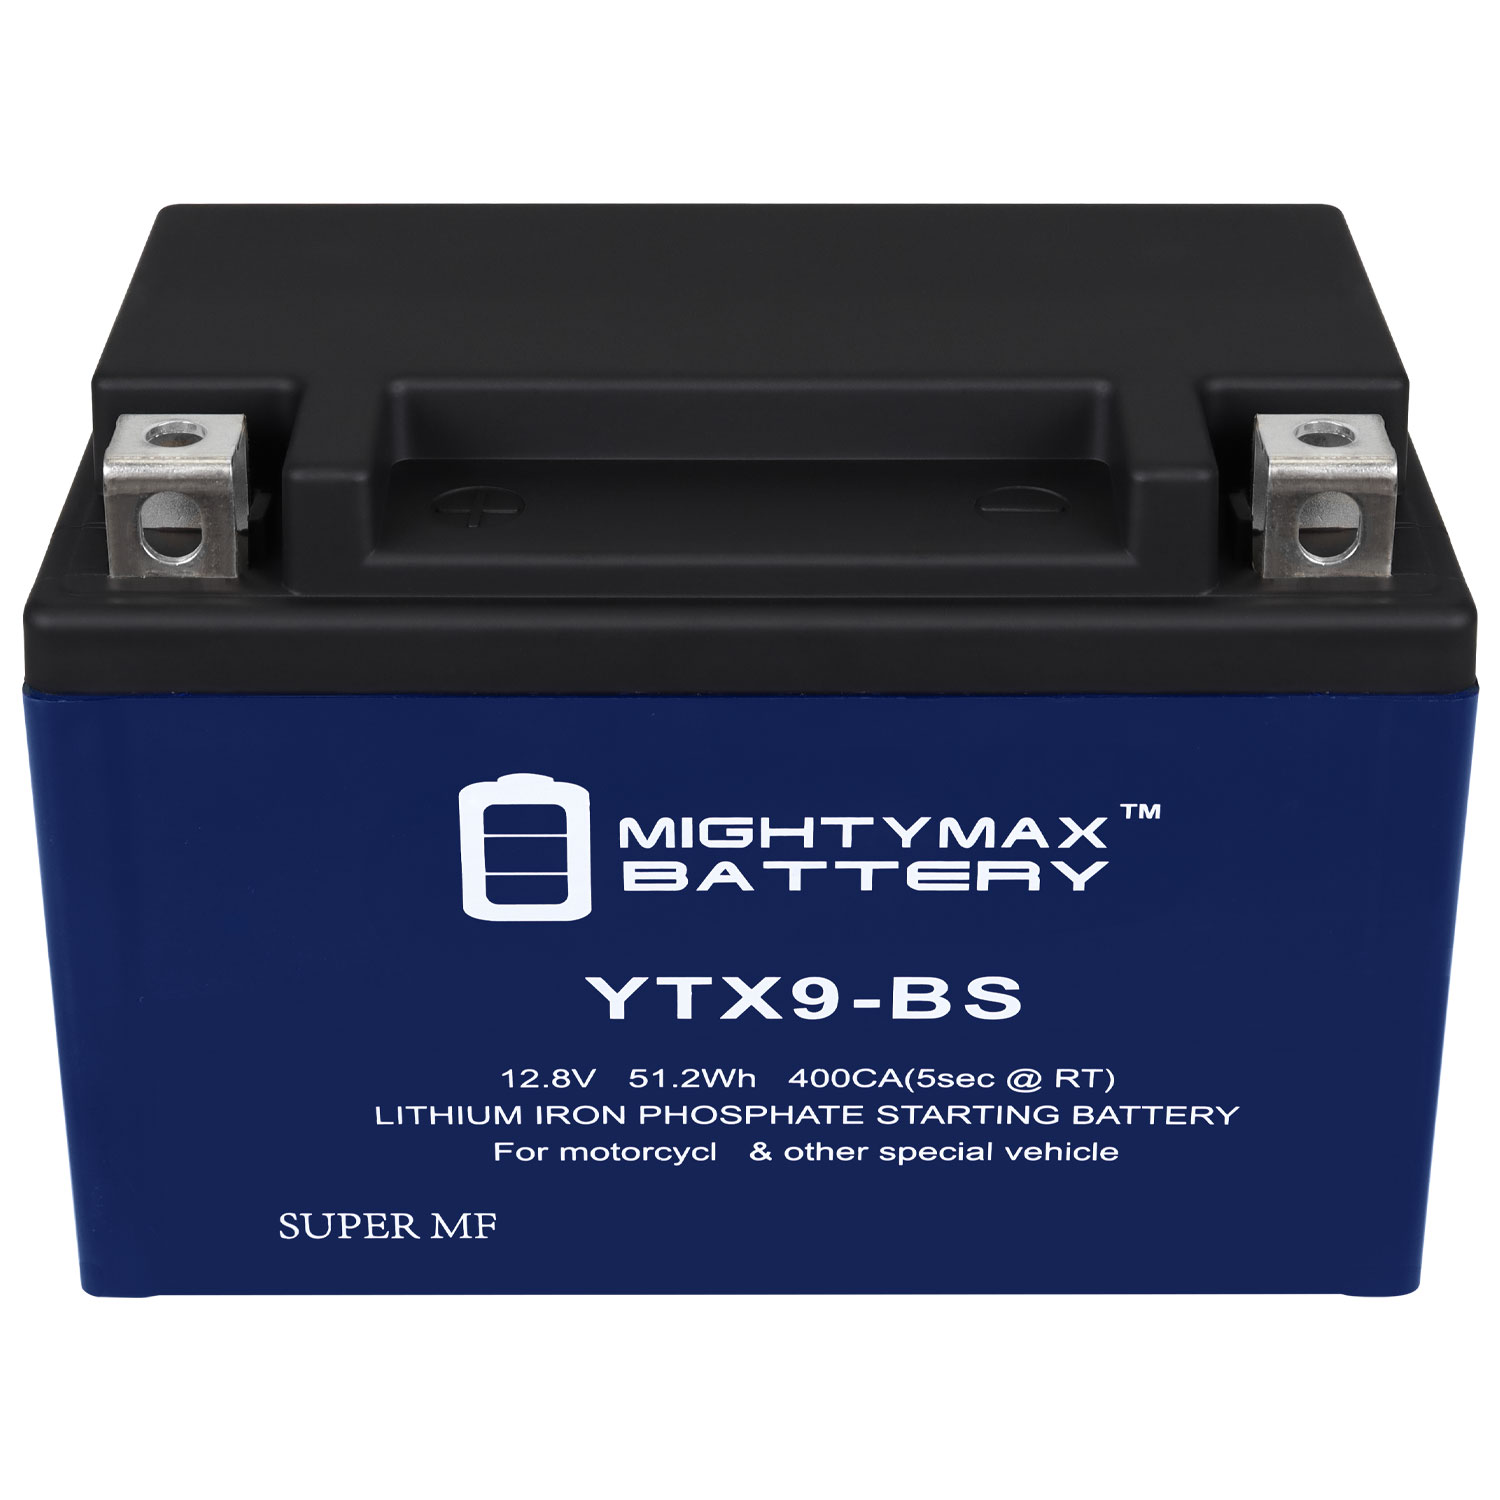 Mighty Max Battery YTX9-BSLIFEPO4 - 12 Volt 8 AH, 300 CCA, Lithium